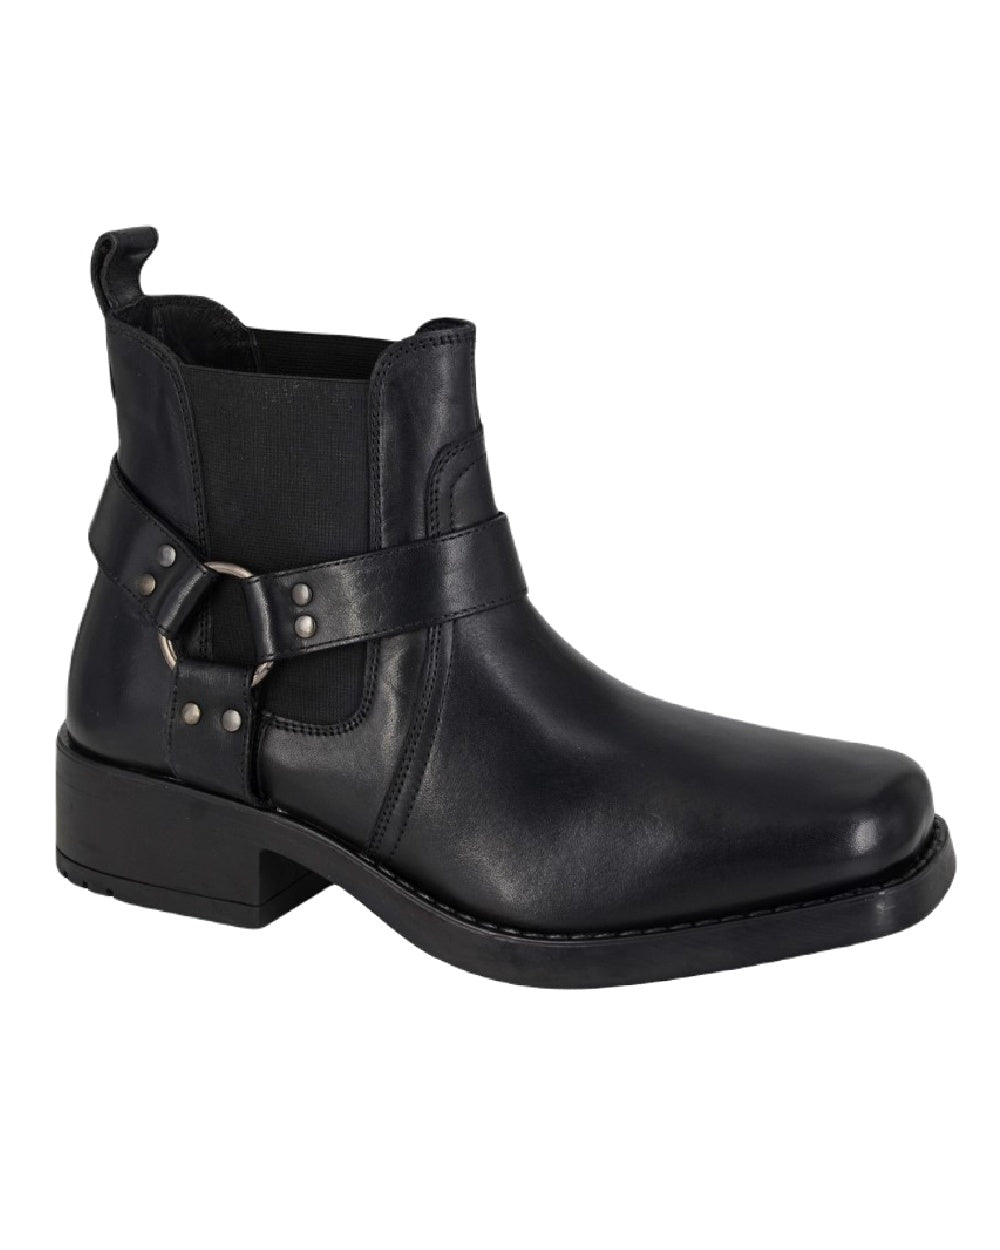 Woodland Low Harley Gusset Harness Boots In Black 